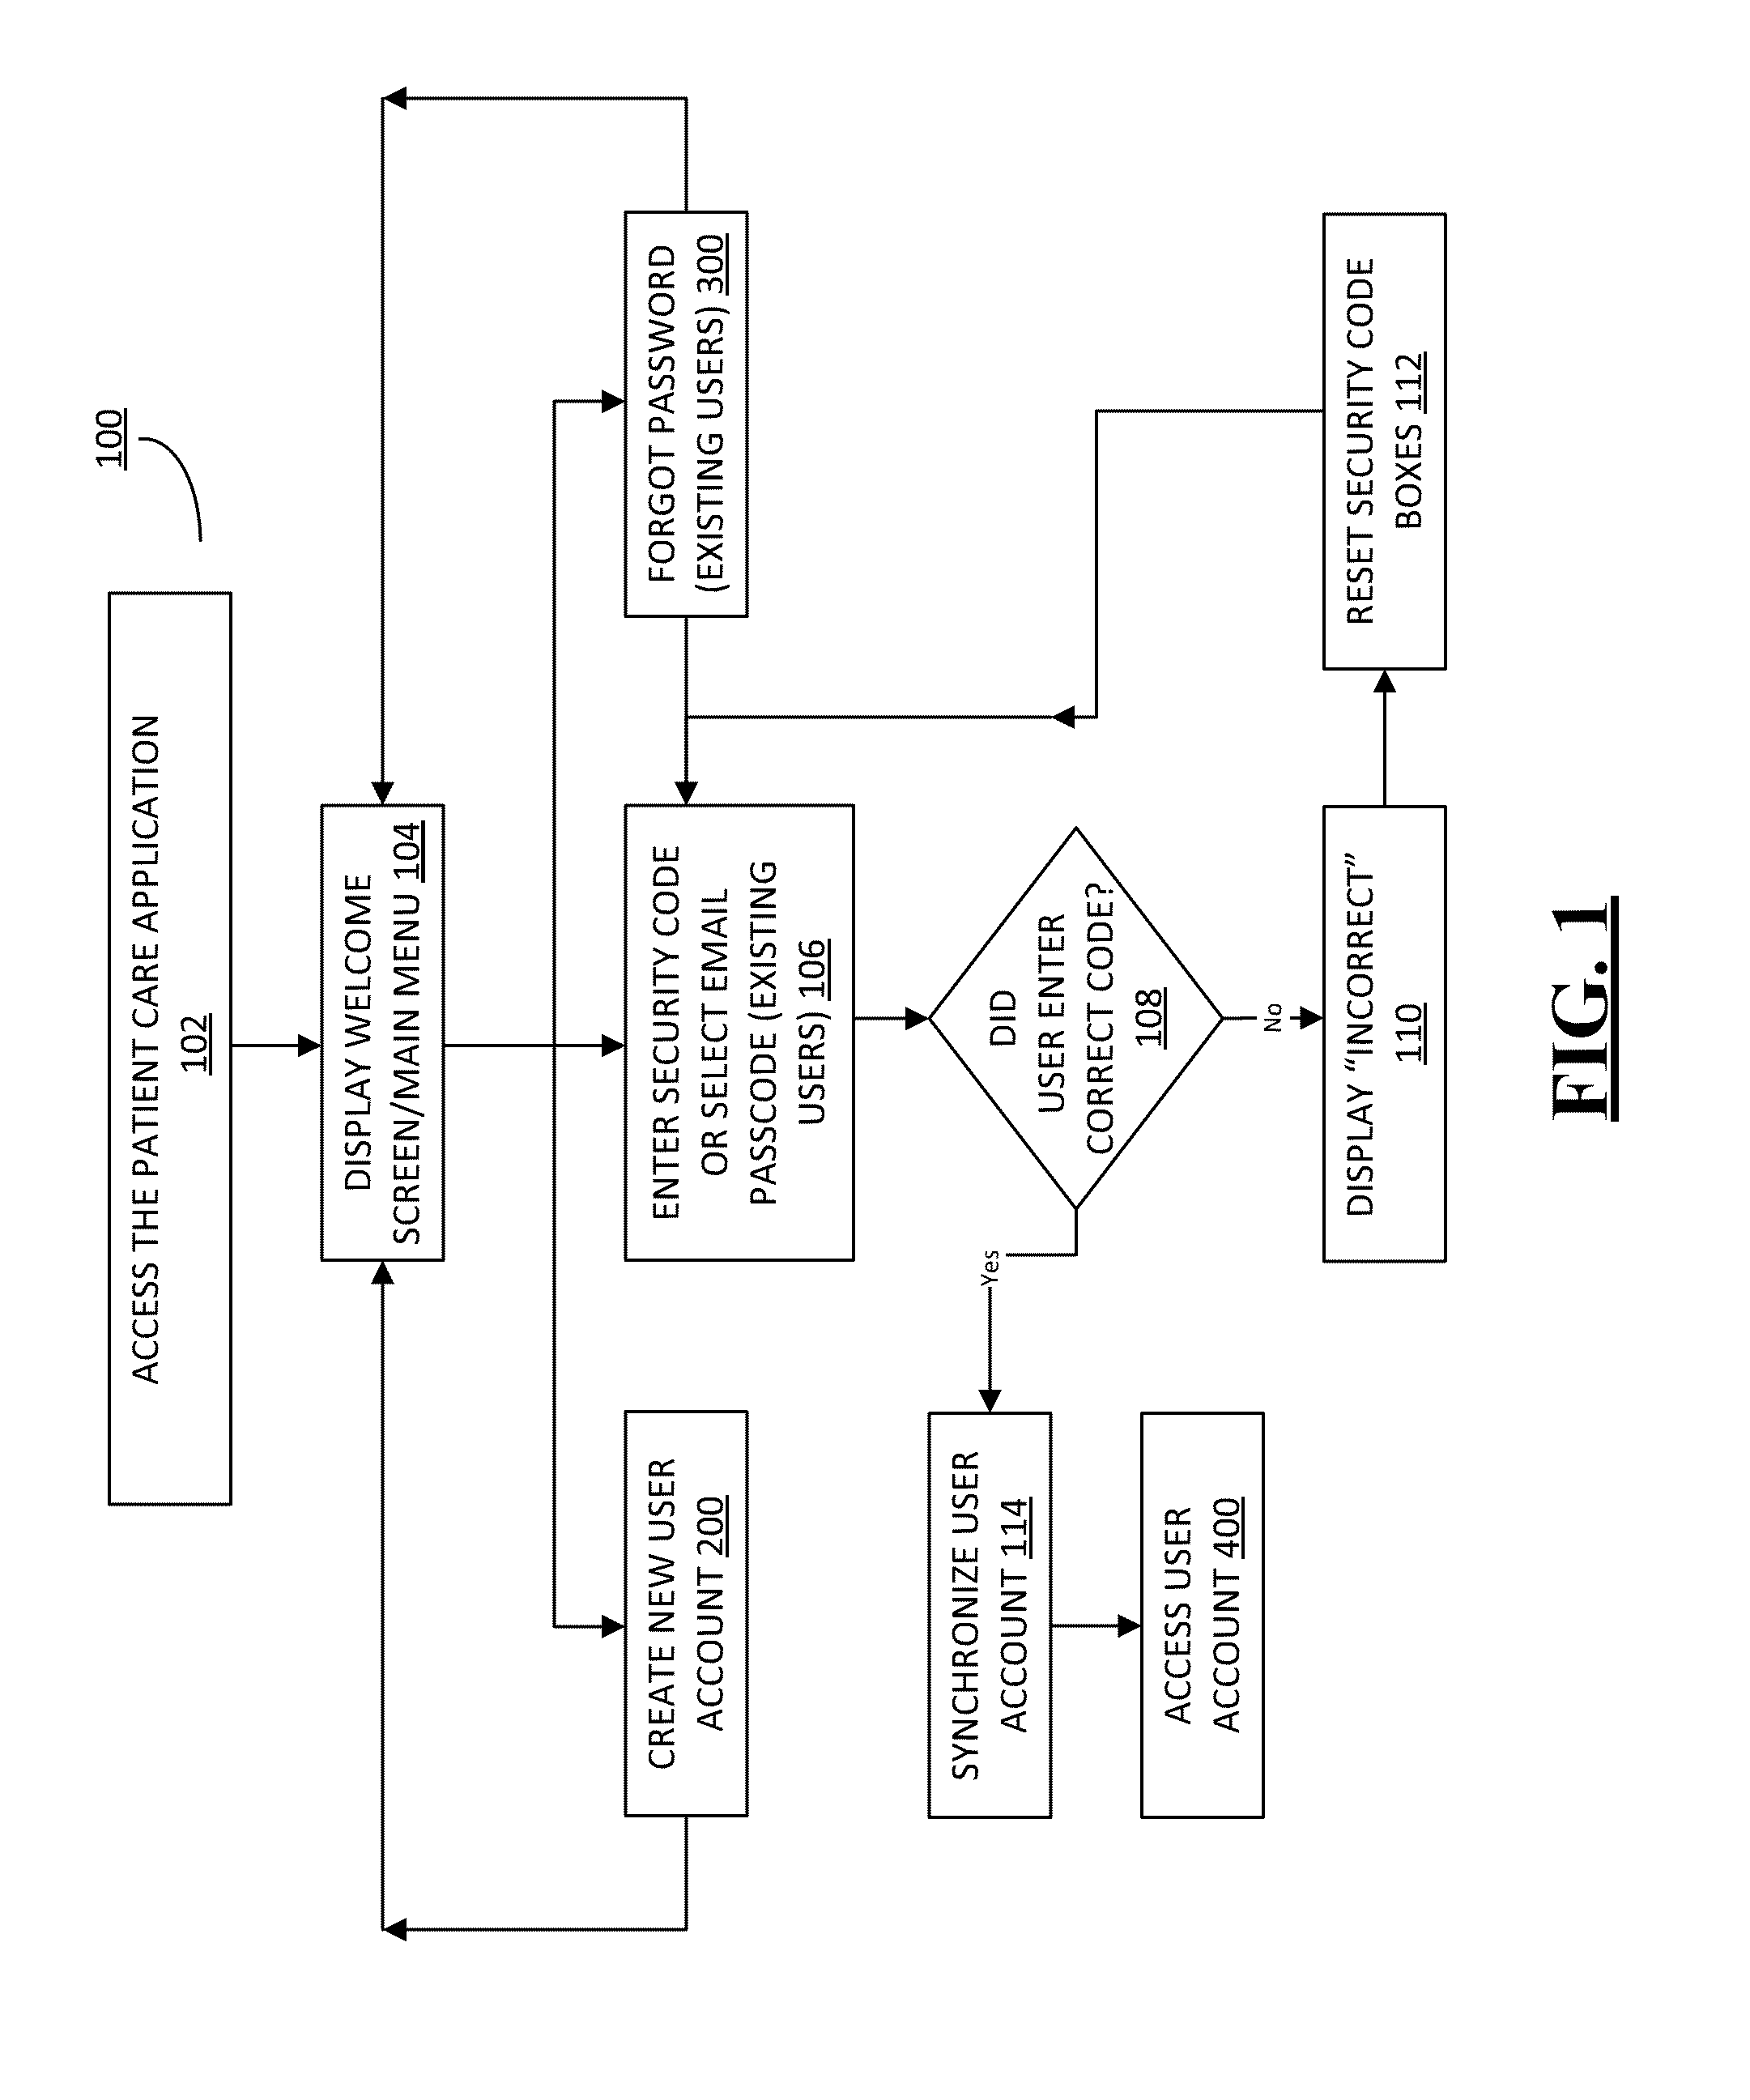 Patient care systems and methods